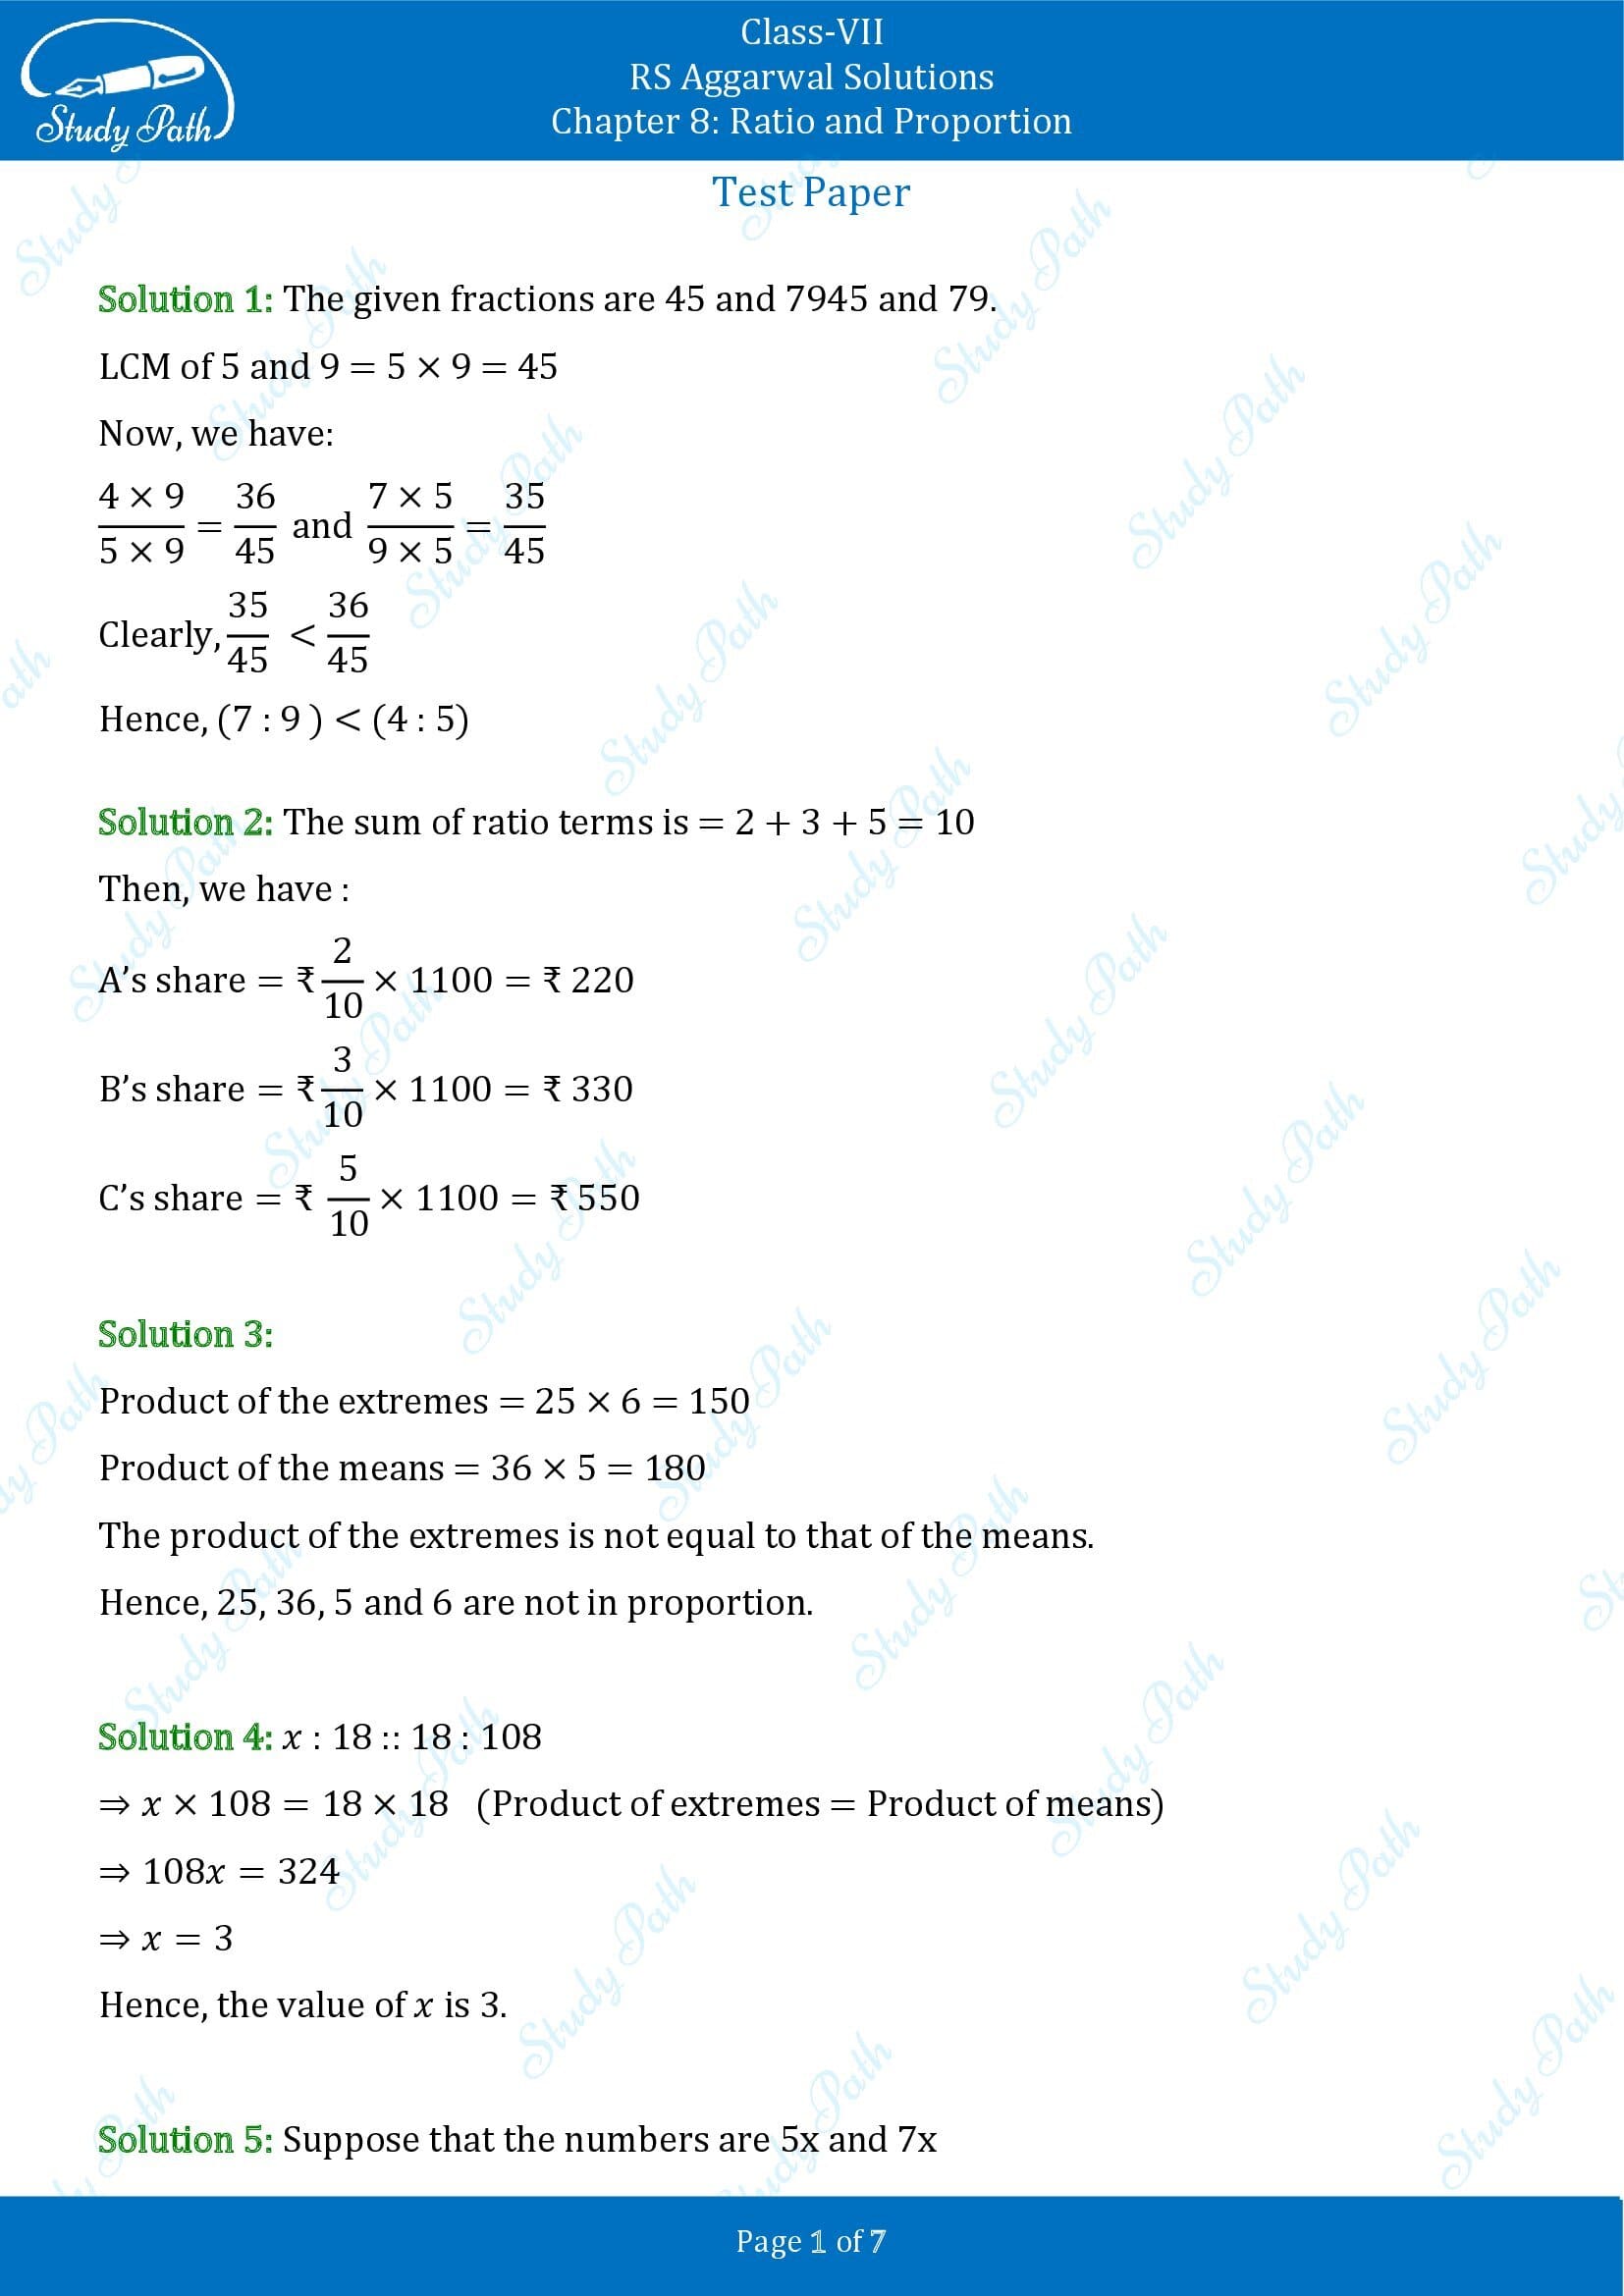 RS Aggarwal Solutions Class 7 Chapter 8 Ratio and Proportion Test Paper 00001